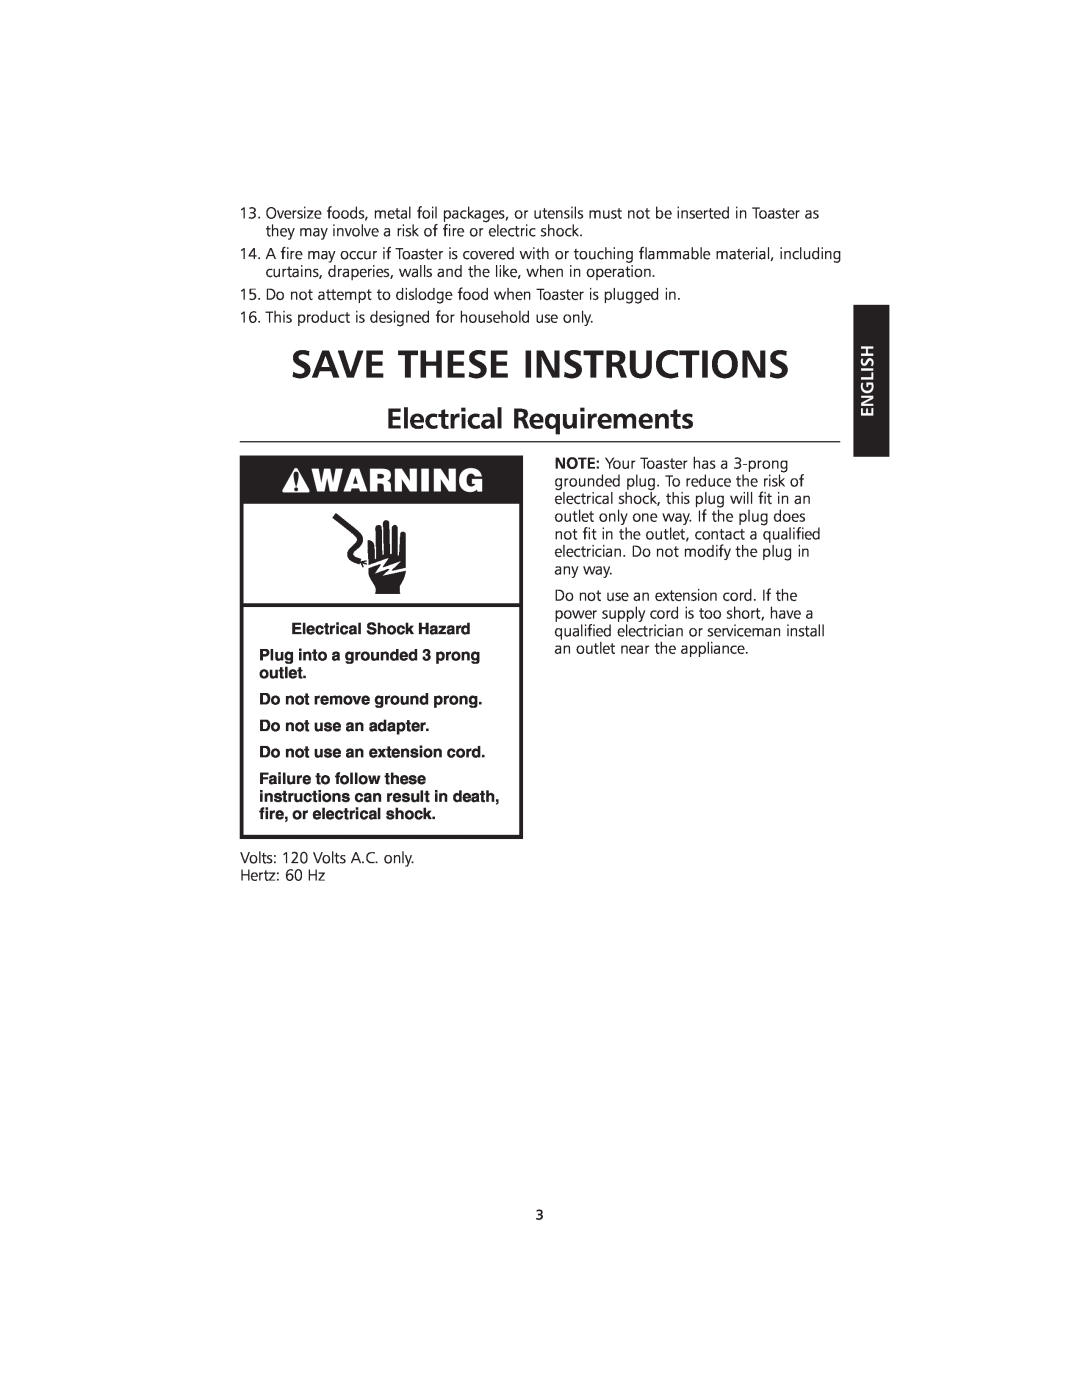 KitchenAid KMTT400 Save These Instructions, Electrical Requirements, Electrical Shock Hazard, Do not use an extension cord 